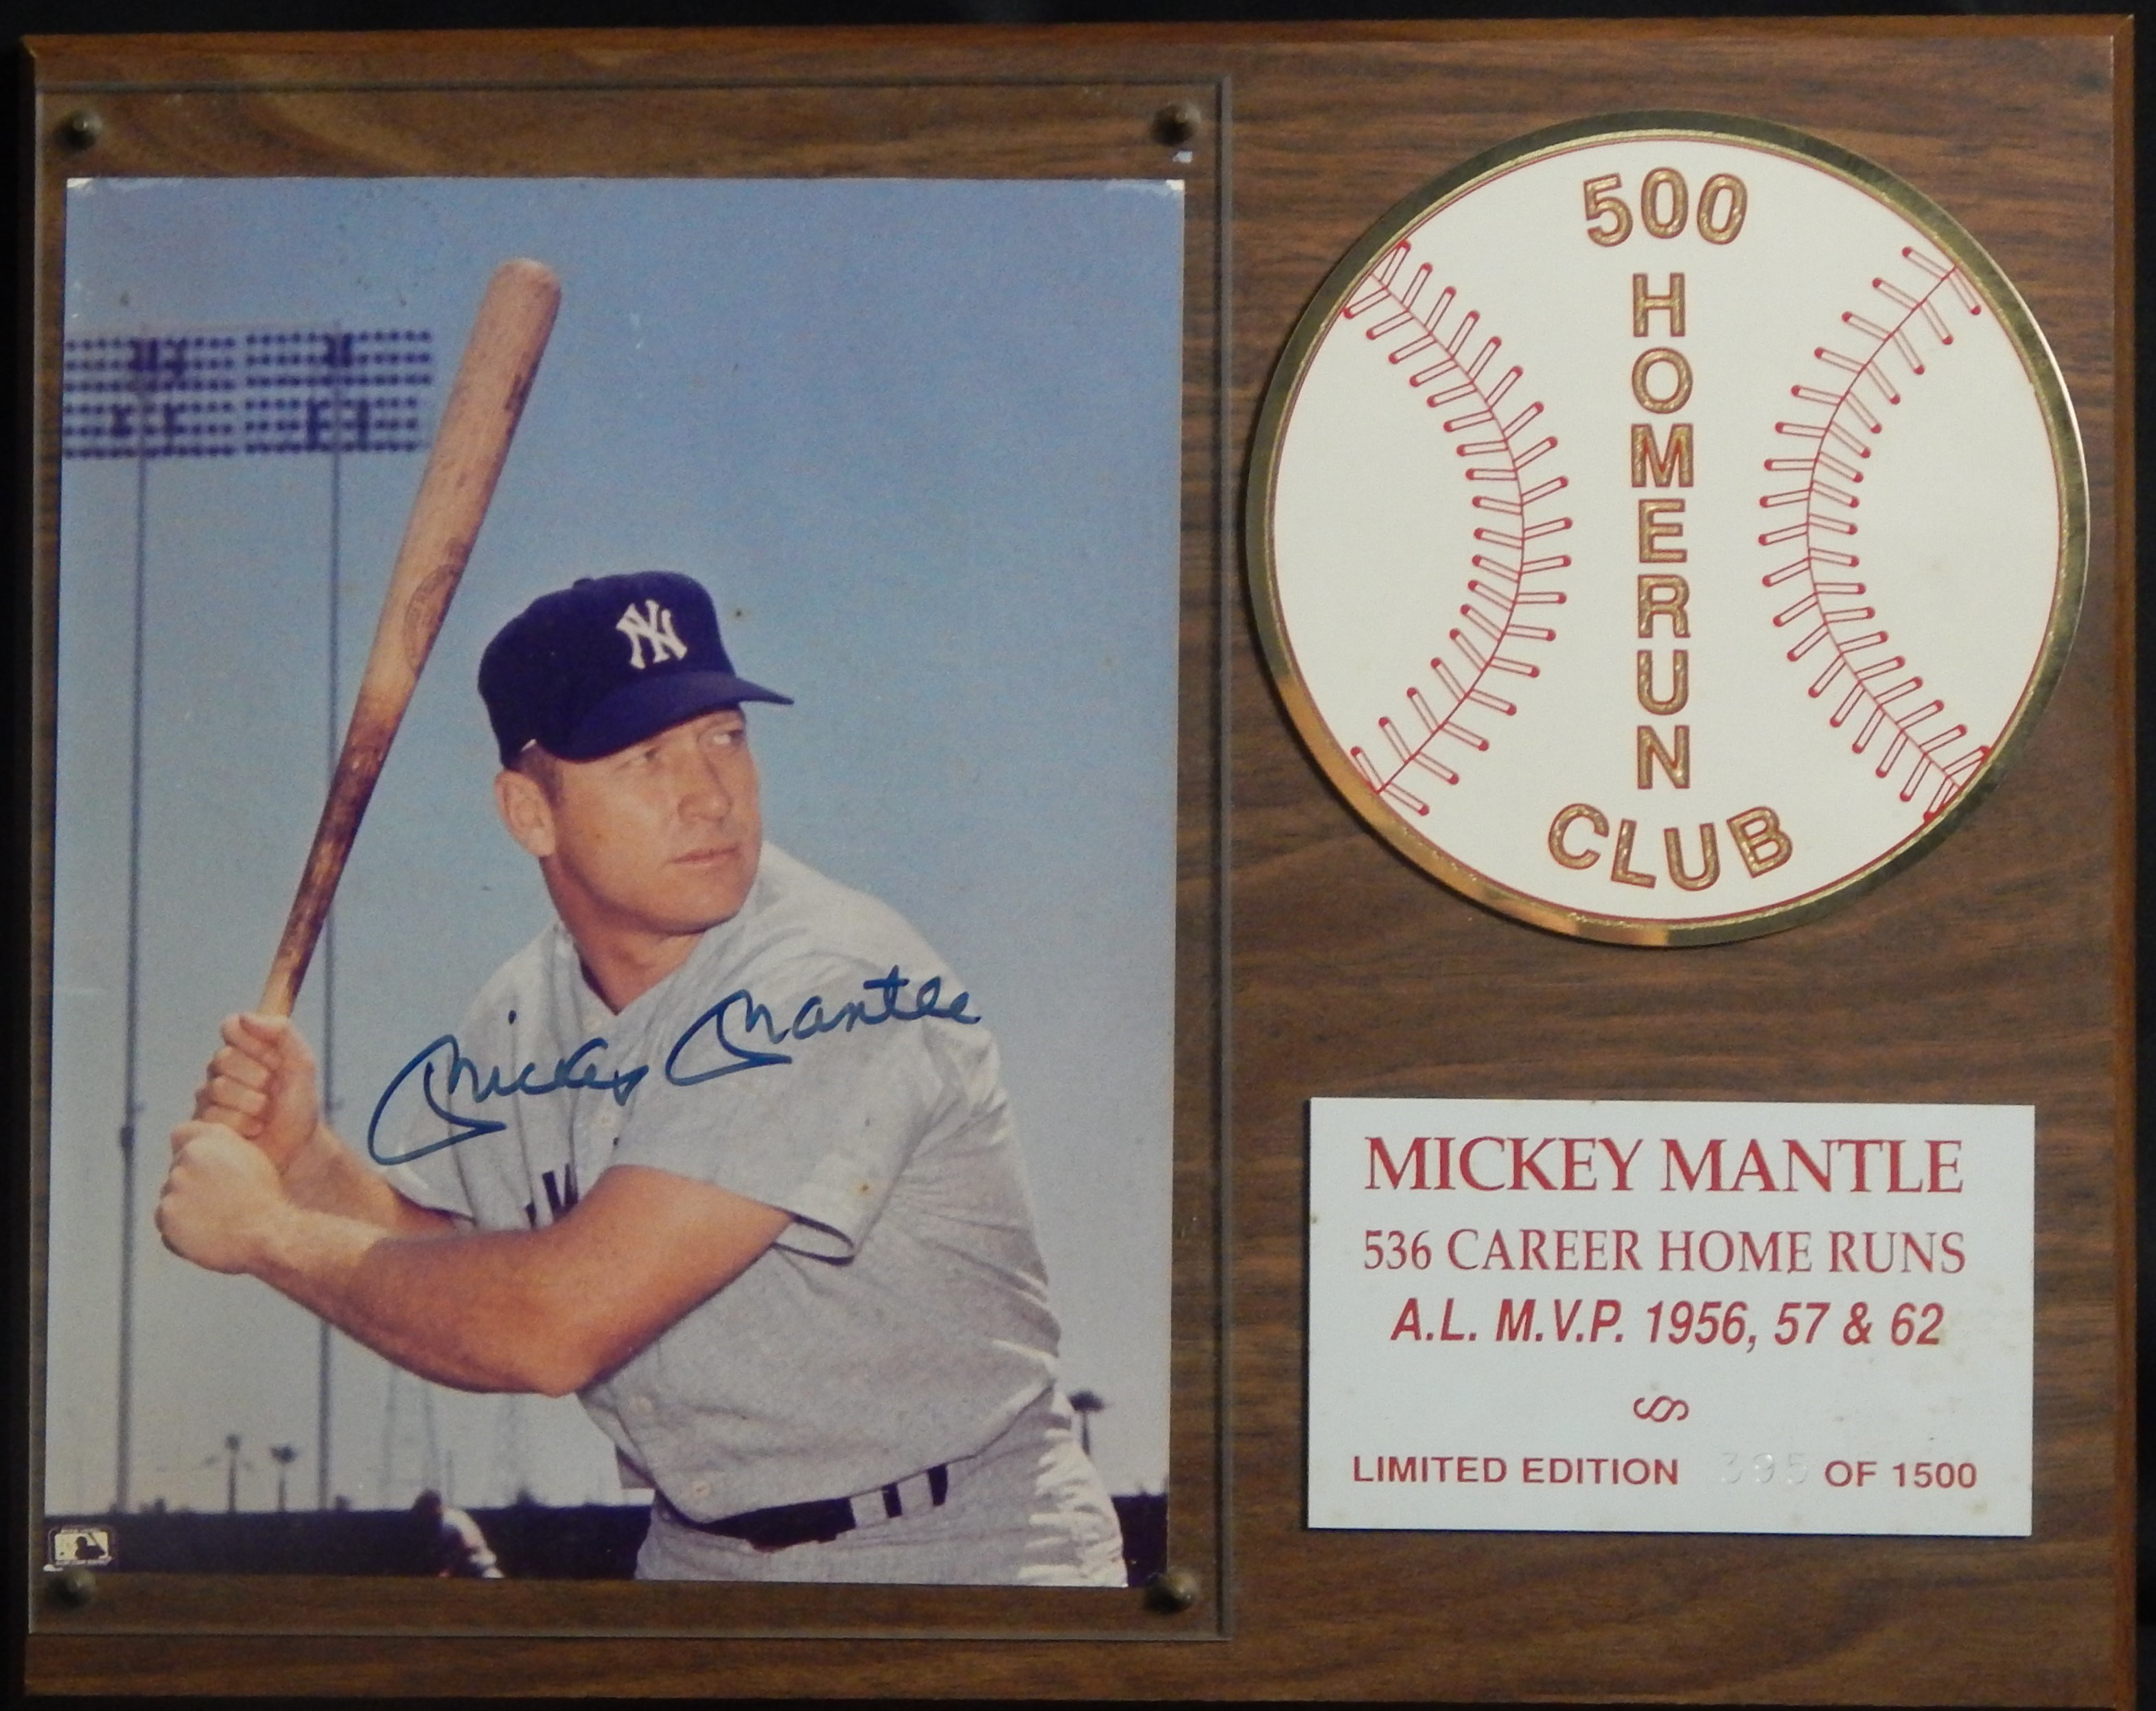 Mickey Mantle Signed 500 HR Club Plaque